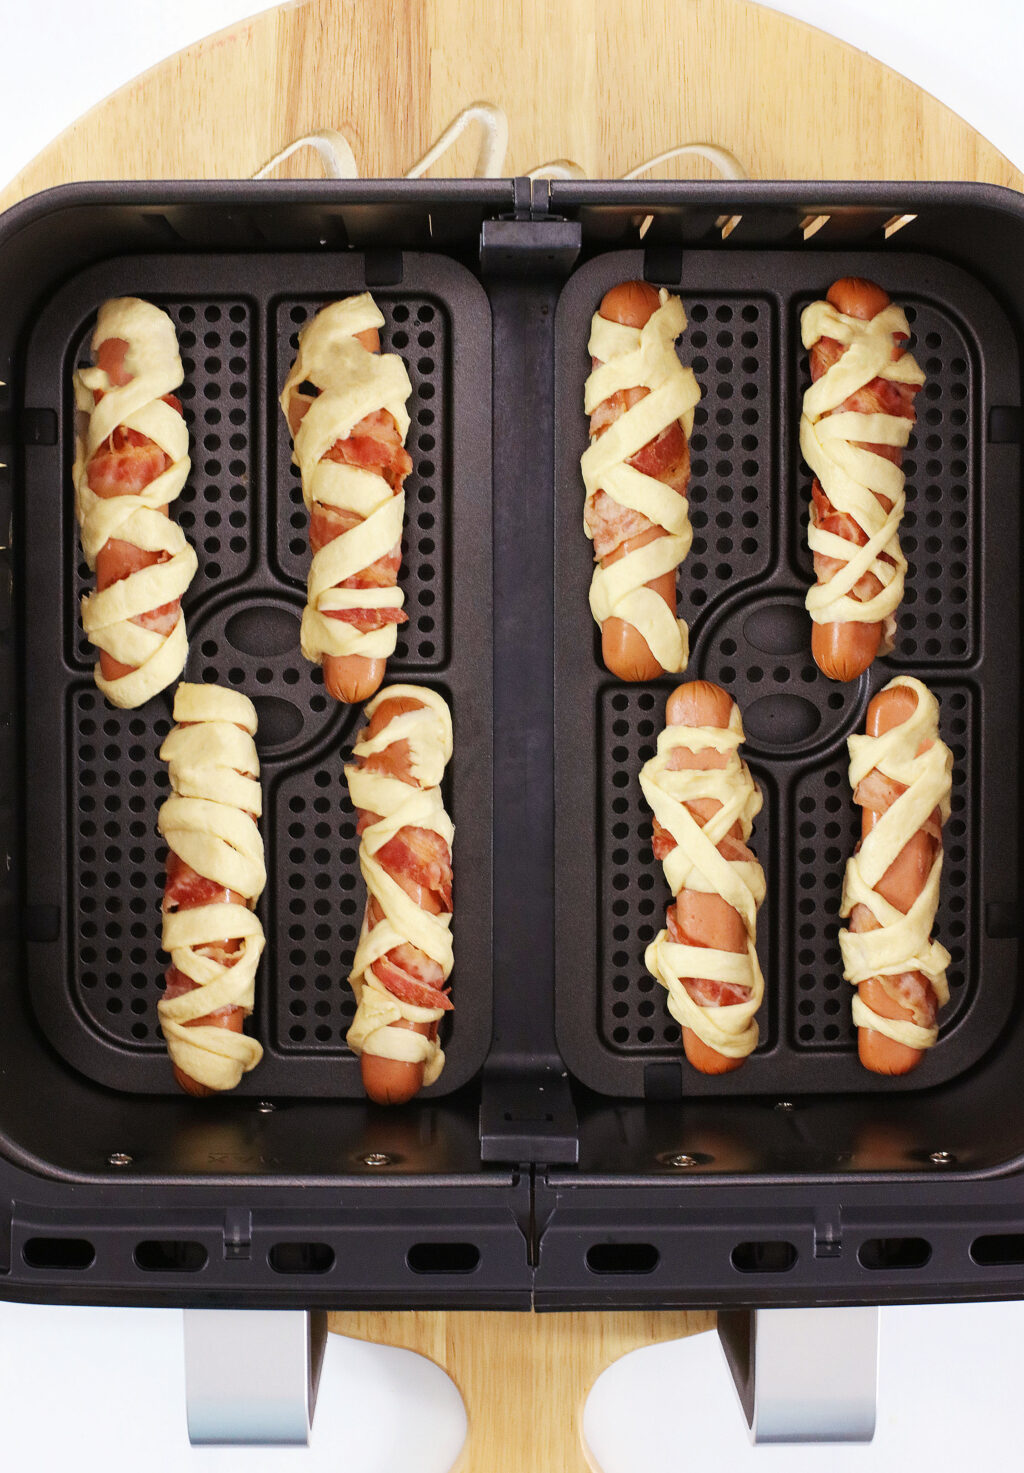 mummy hot dogs on air fryer tray